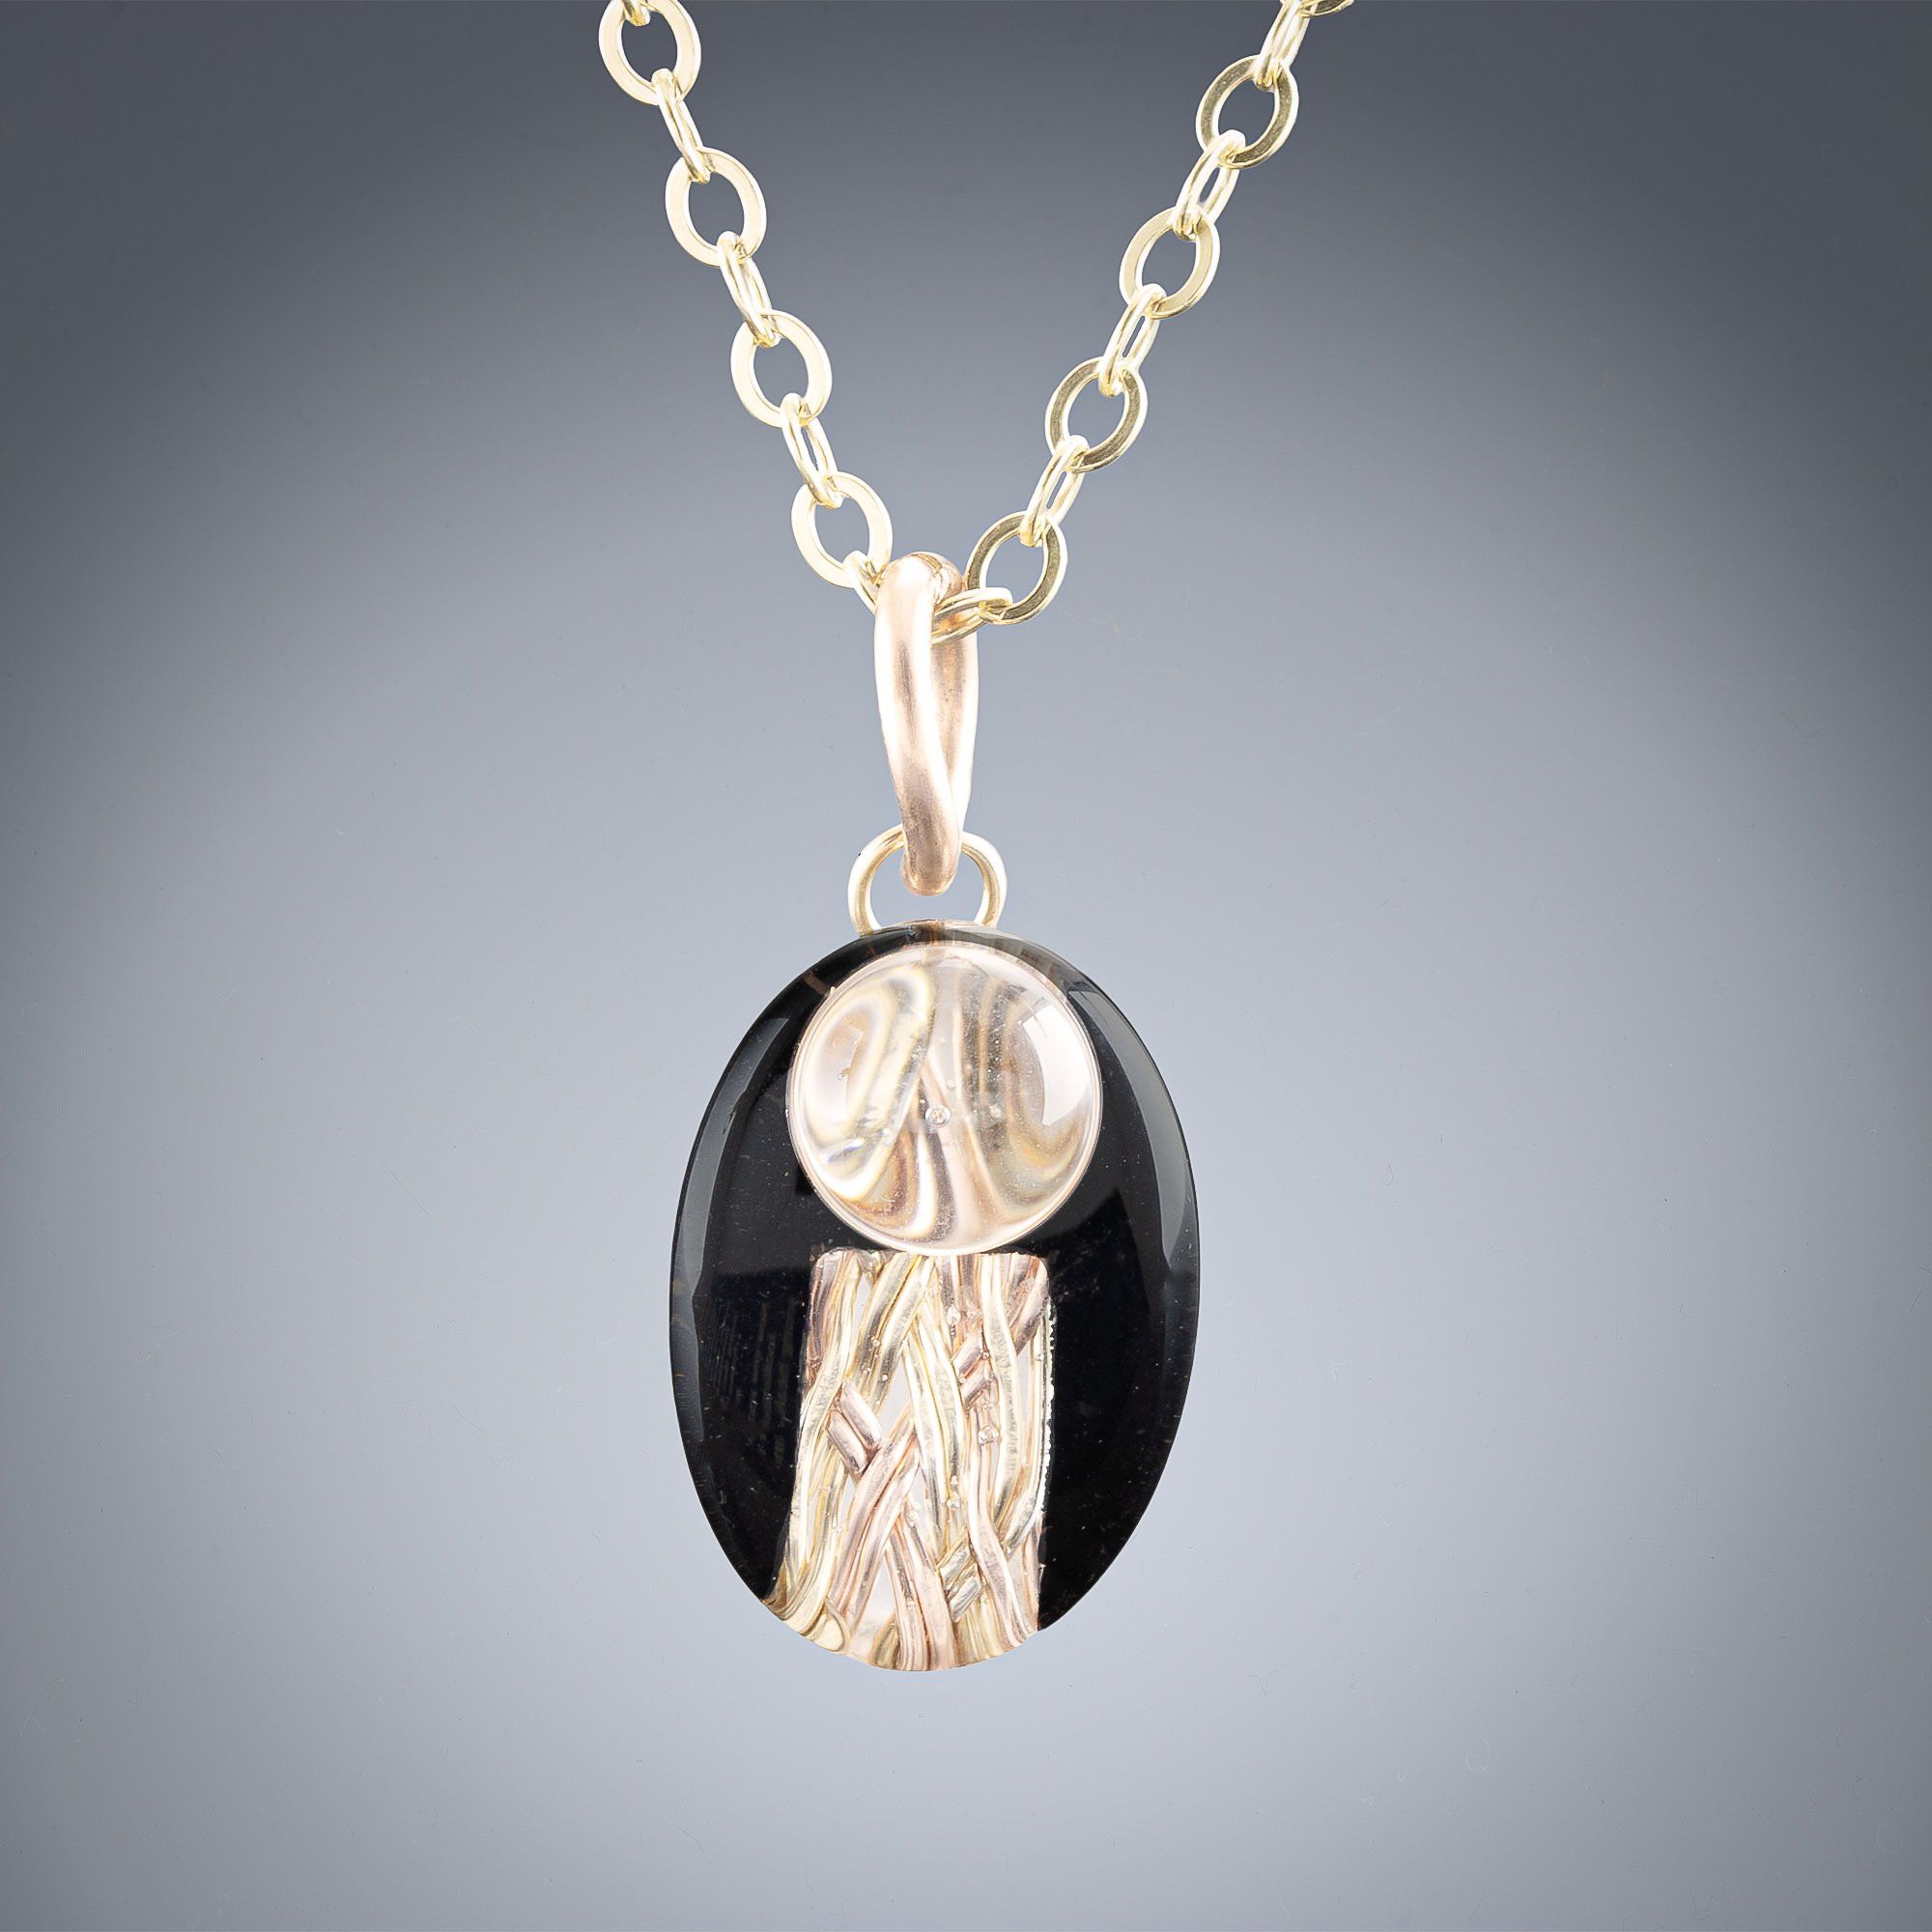 Small Oval Black and Gold Art Deco Inspired Pendant Necklace in 14K Yellow and Rose Gold Fill